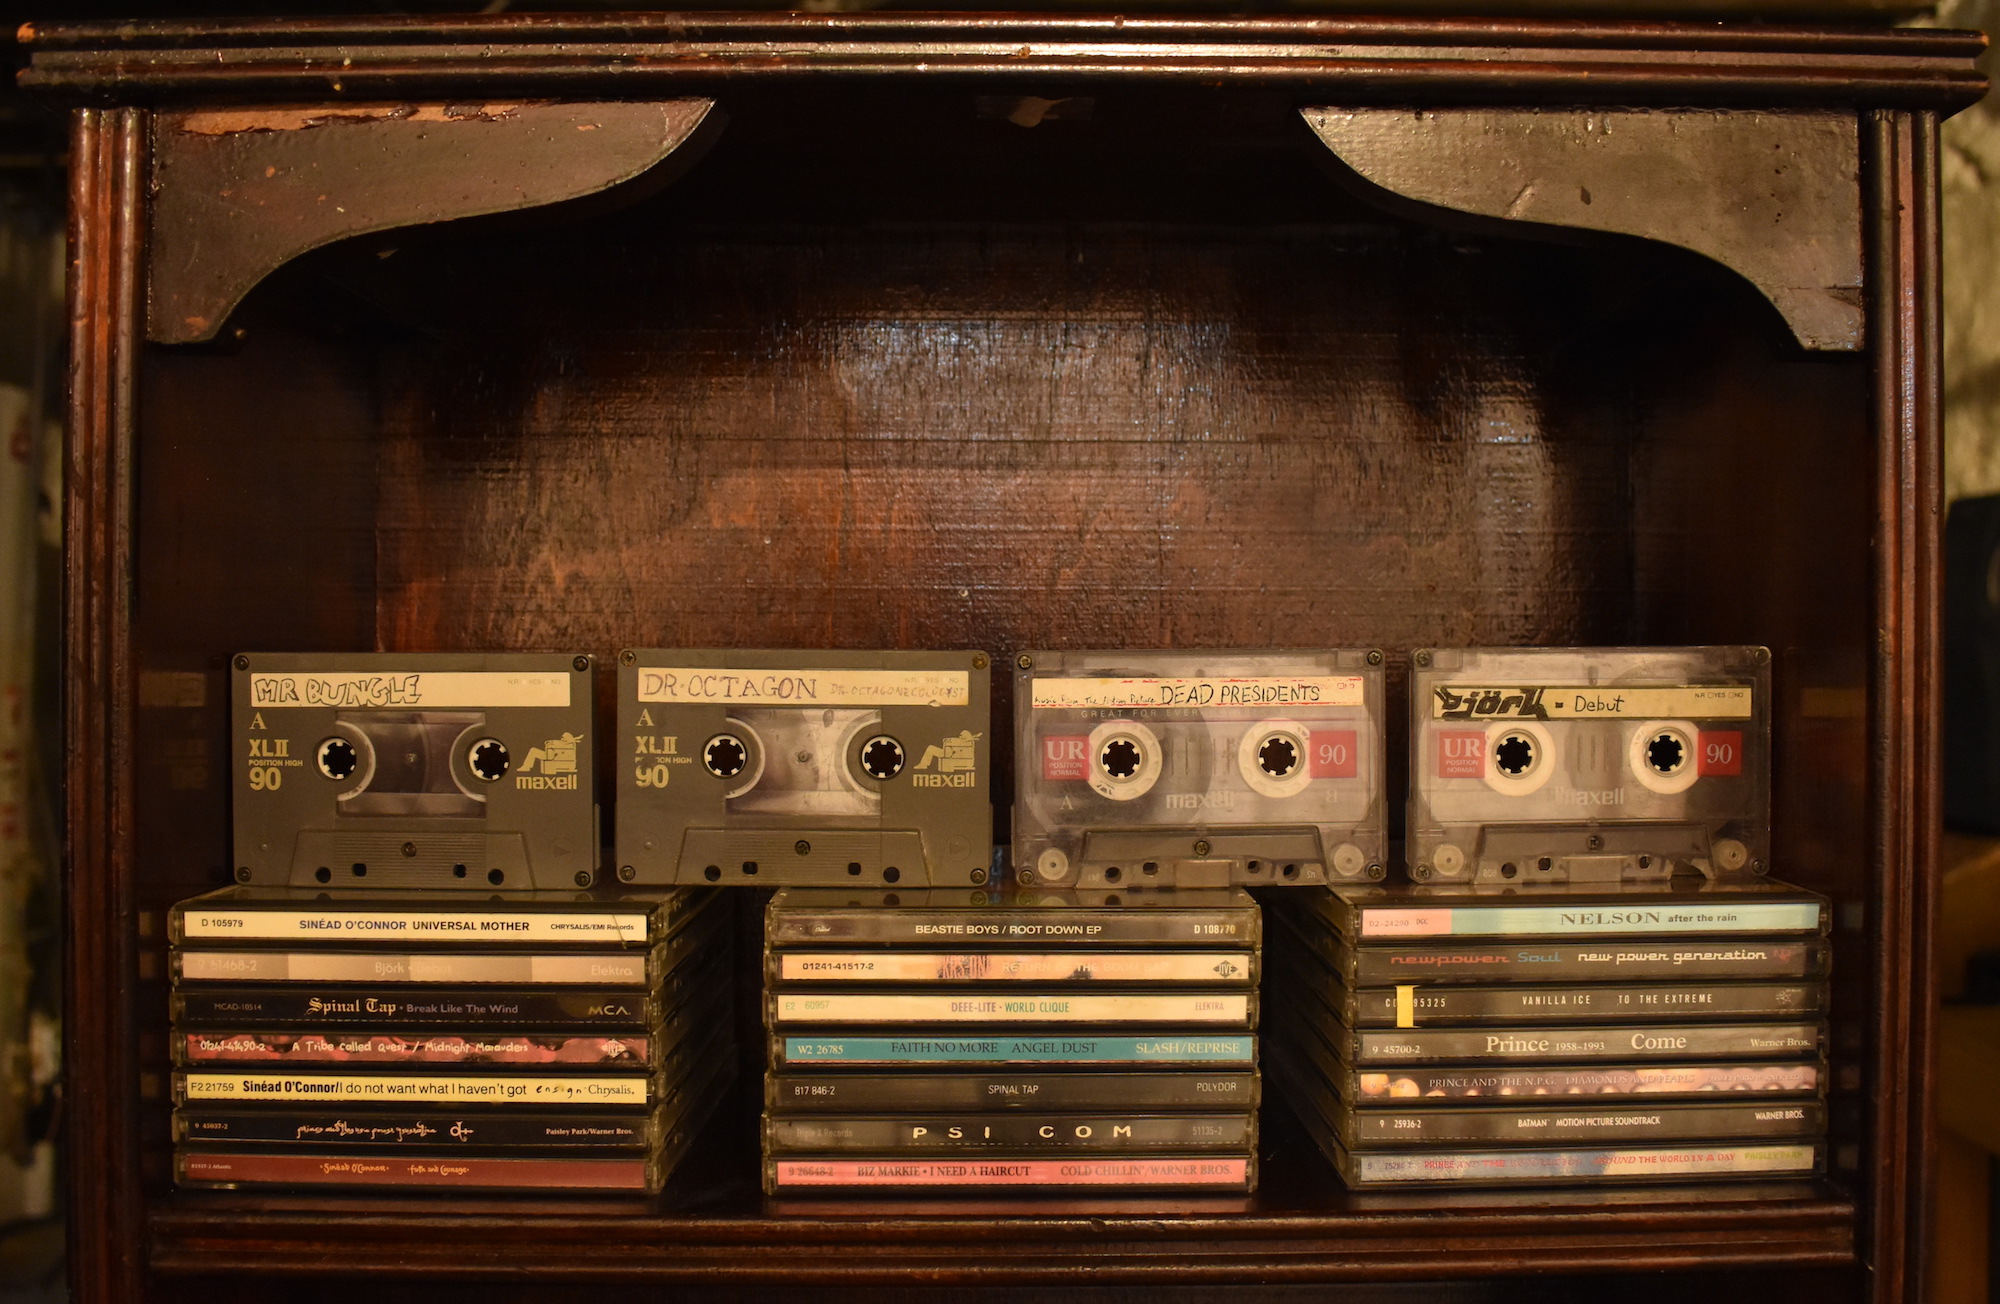 “Pawn Shop CDs and Dubbed Tapes” © John Vogel; Creative Commons license